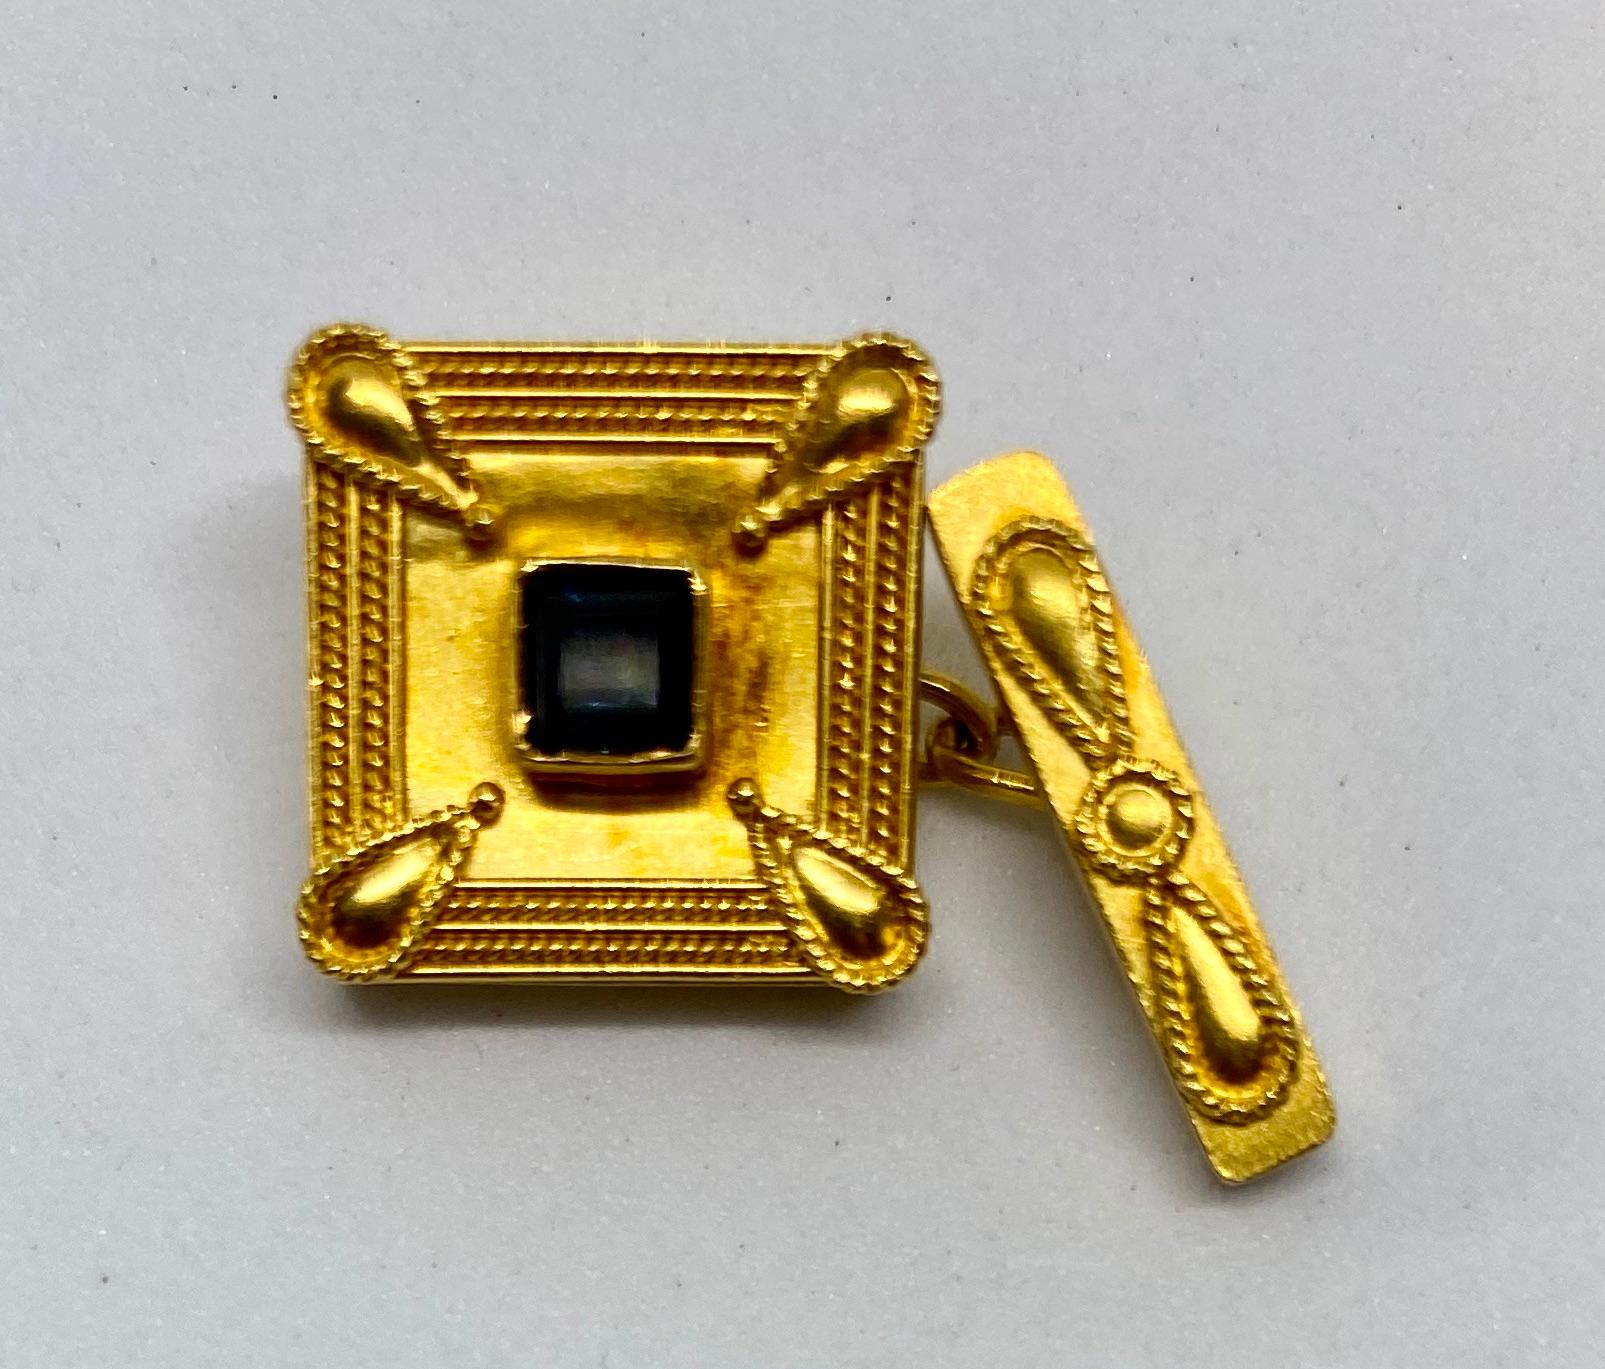 Beautiful cufflinks displaying an extremely high level of the goldsmith's art. With square-cut blue sapphires at their centers, each cufflink face is bordered by two rows of perfectly hand-rendered gold rope. The faces are backed with rectangular